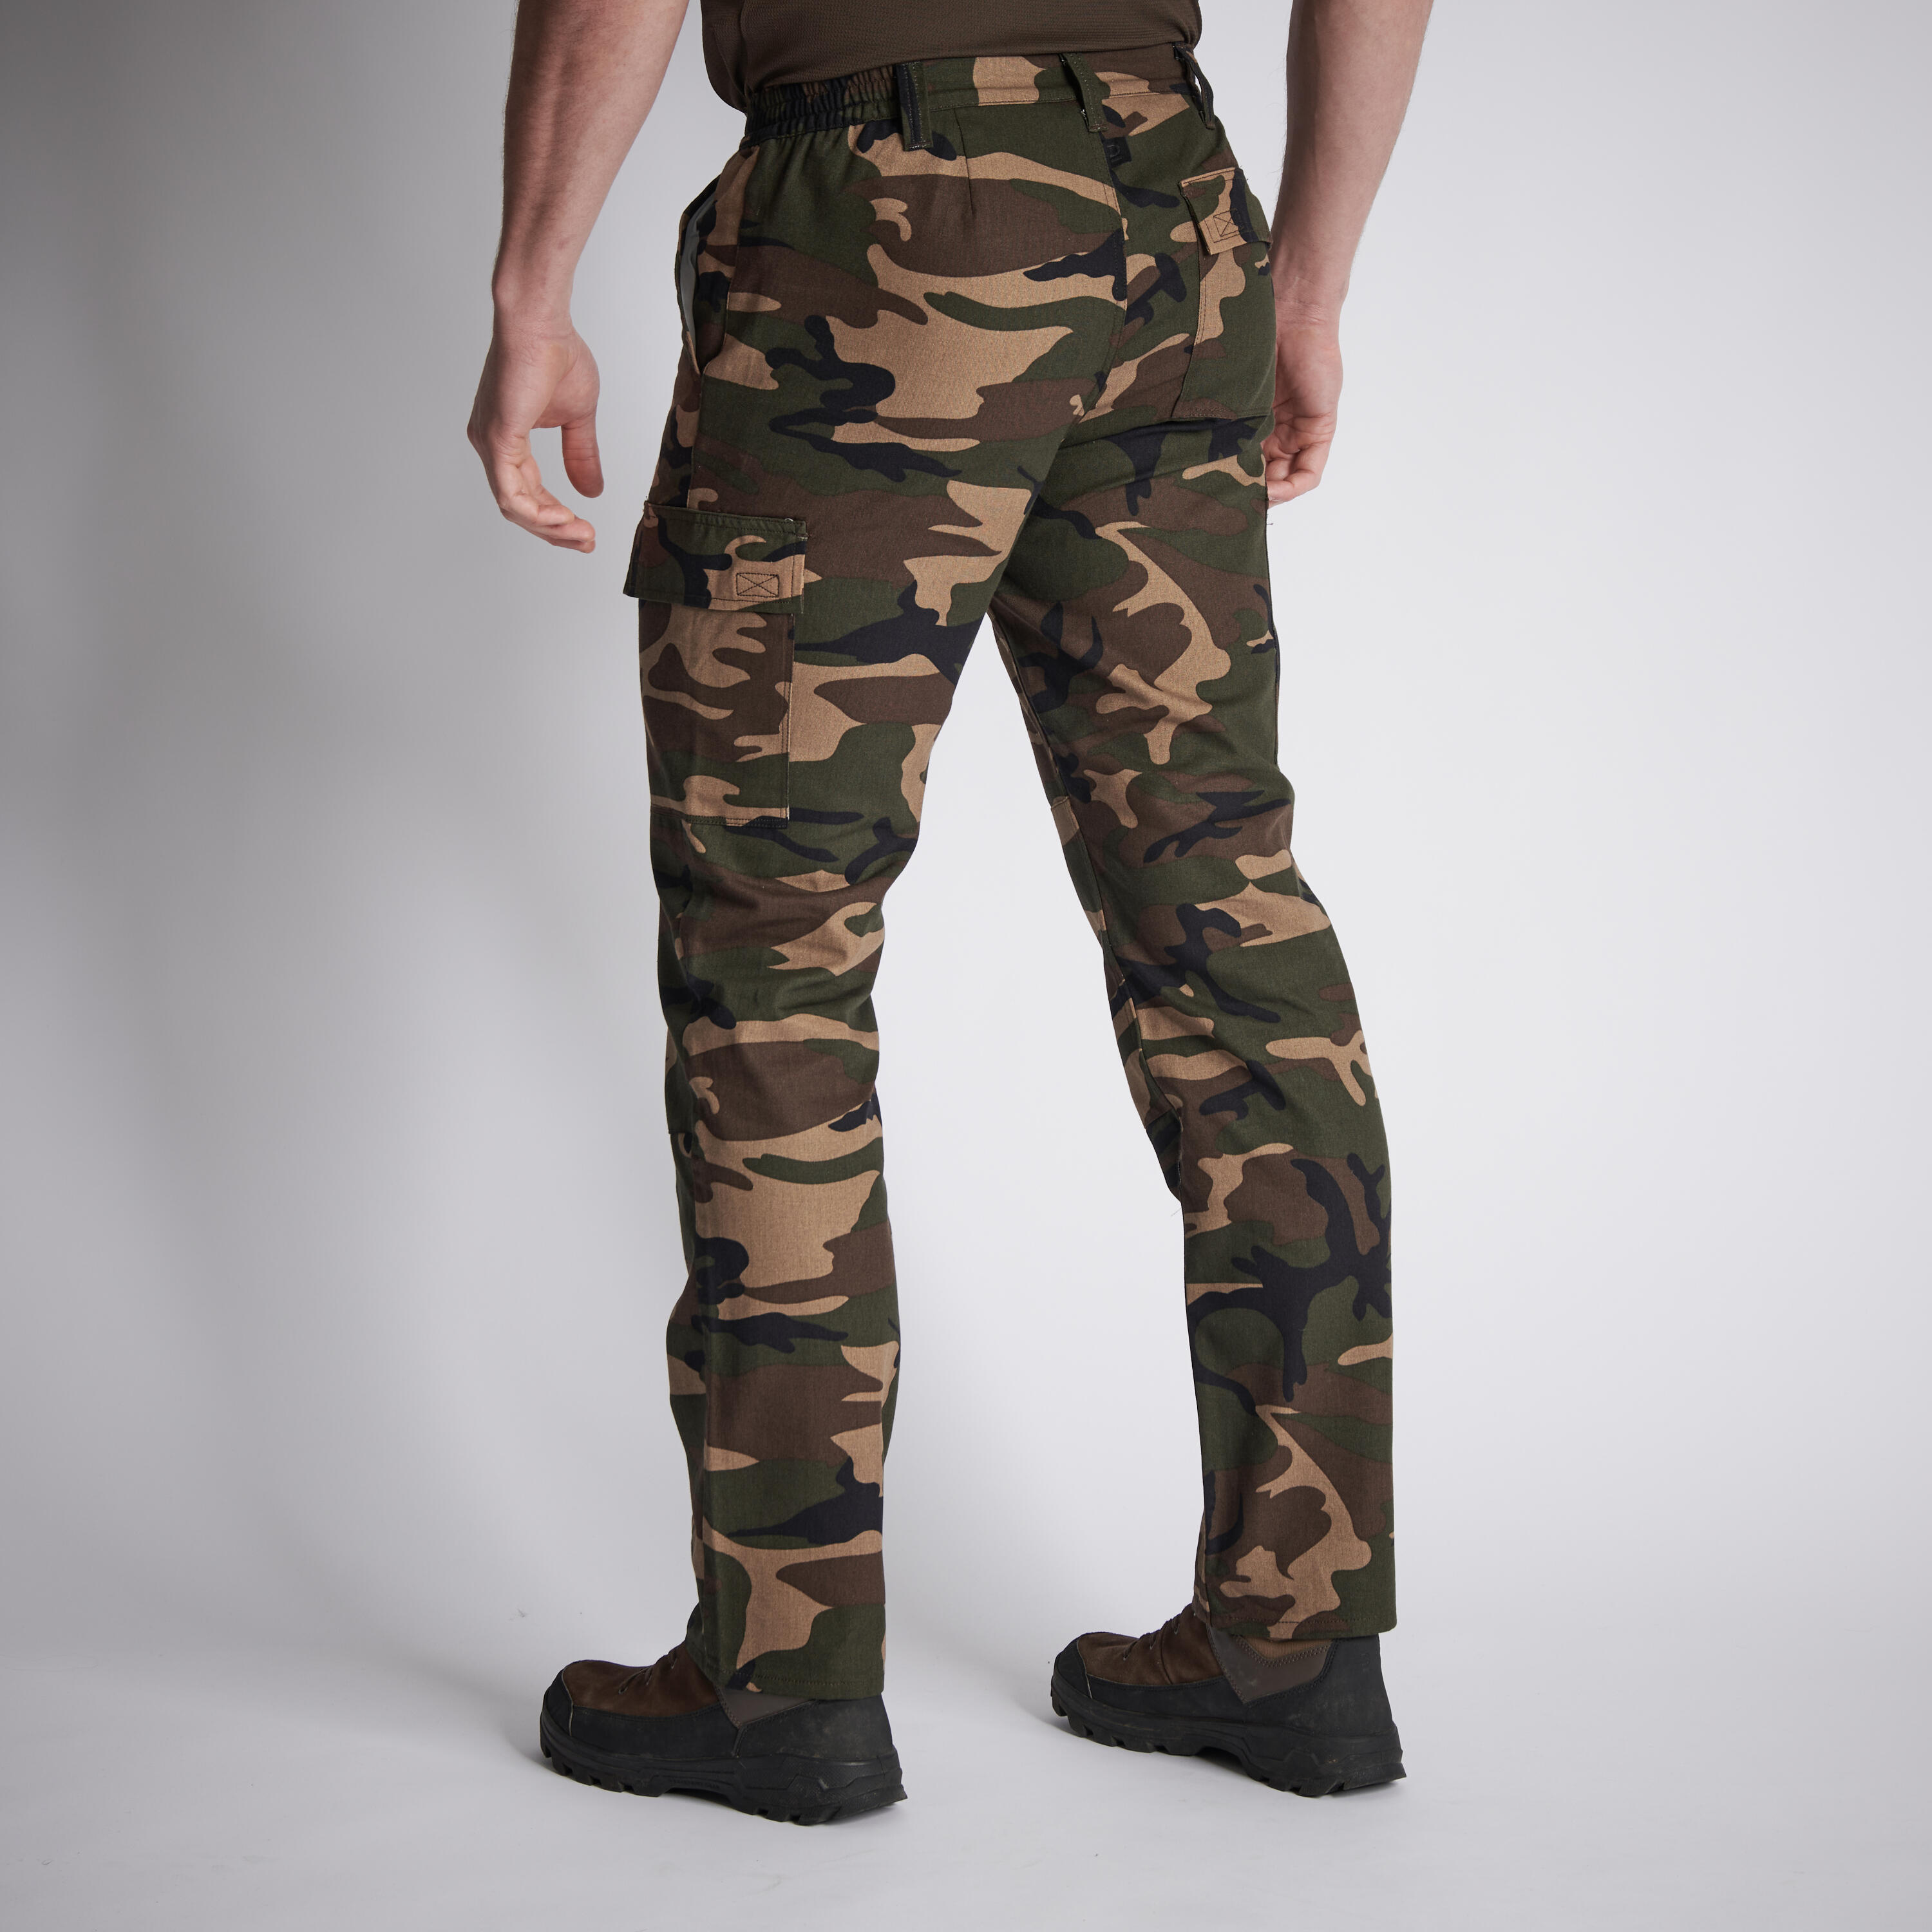 Buy tbase Mens Olive Camo Print Cargo Pants for Men Online India